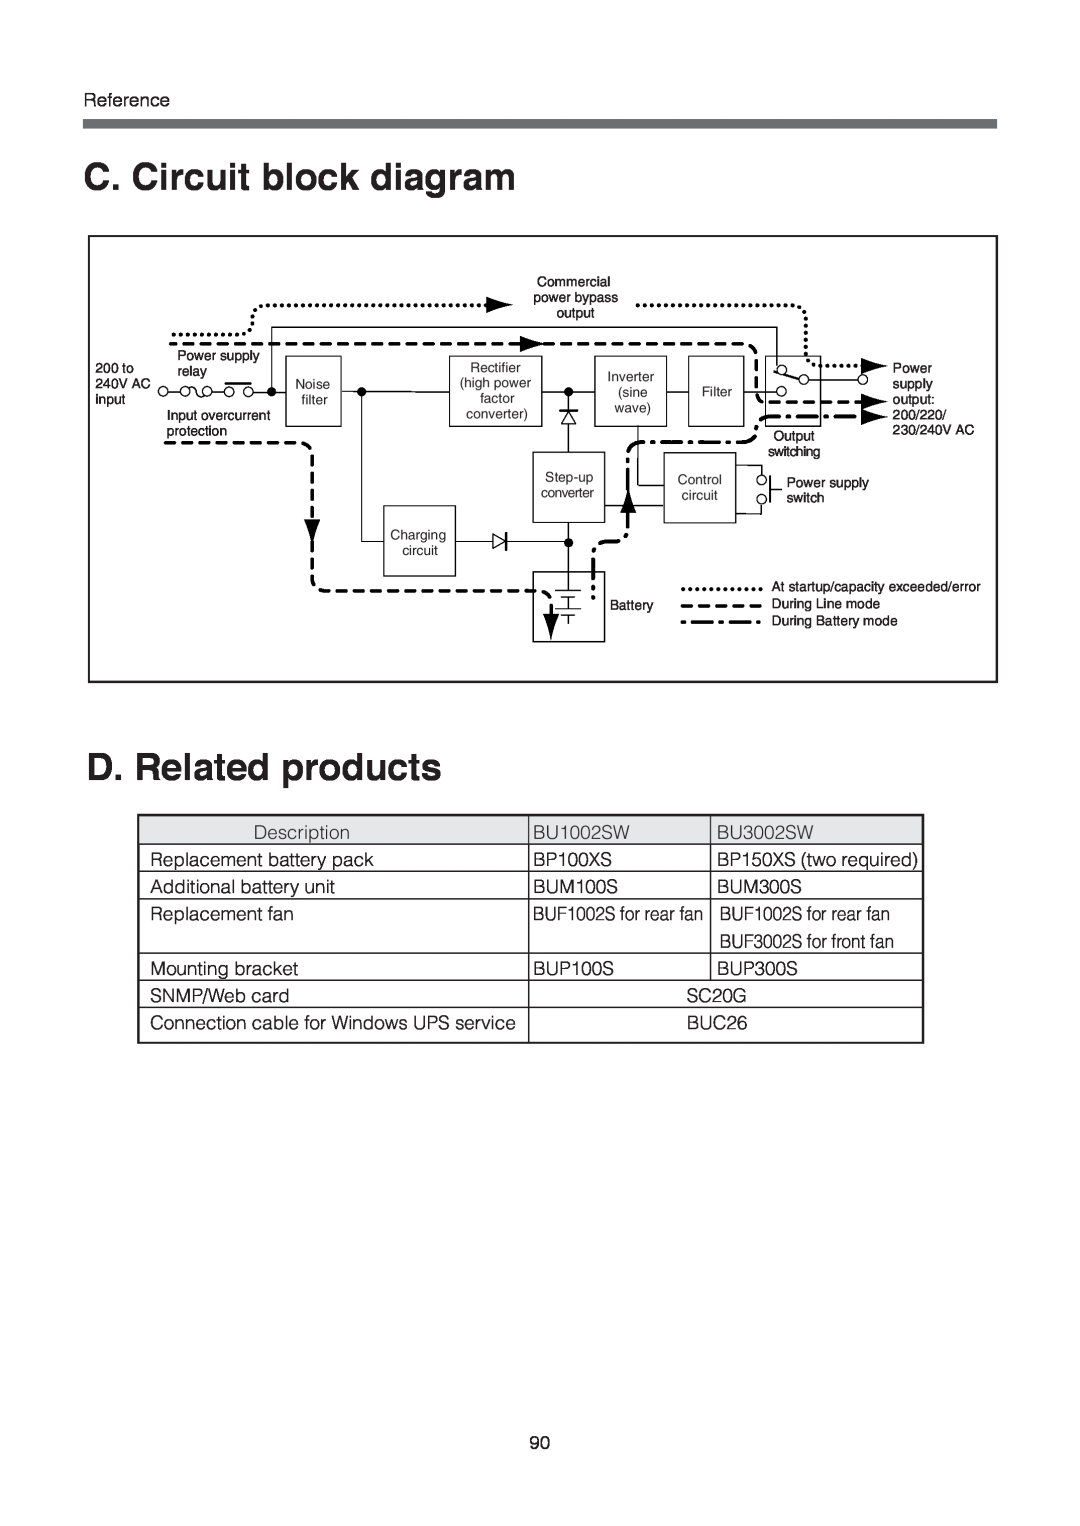 Omron BU3002SW, BU1002SW specifications C. Circuit block diagram, D. Related products, BUF1002S for rear fan 